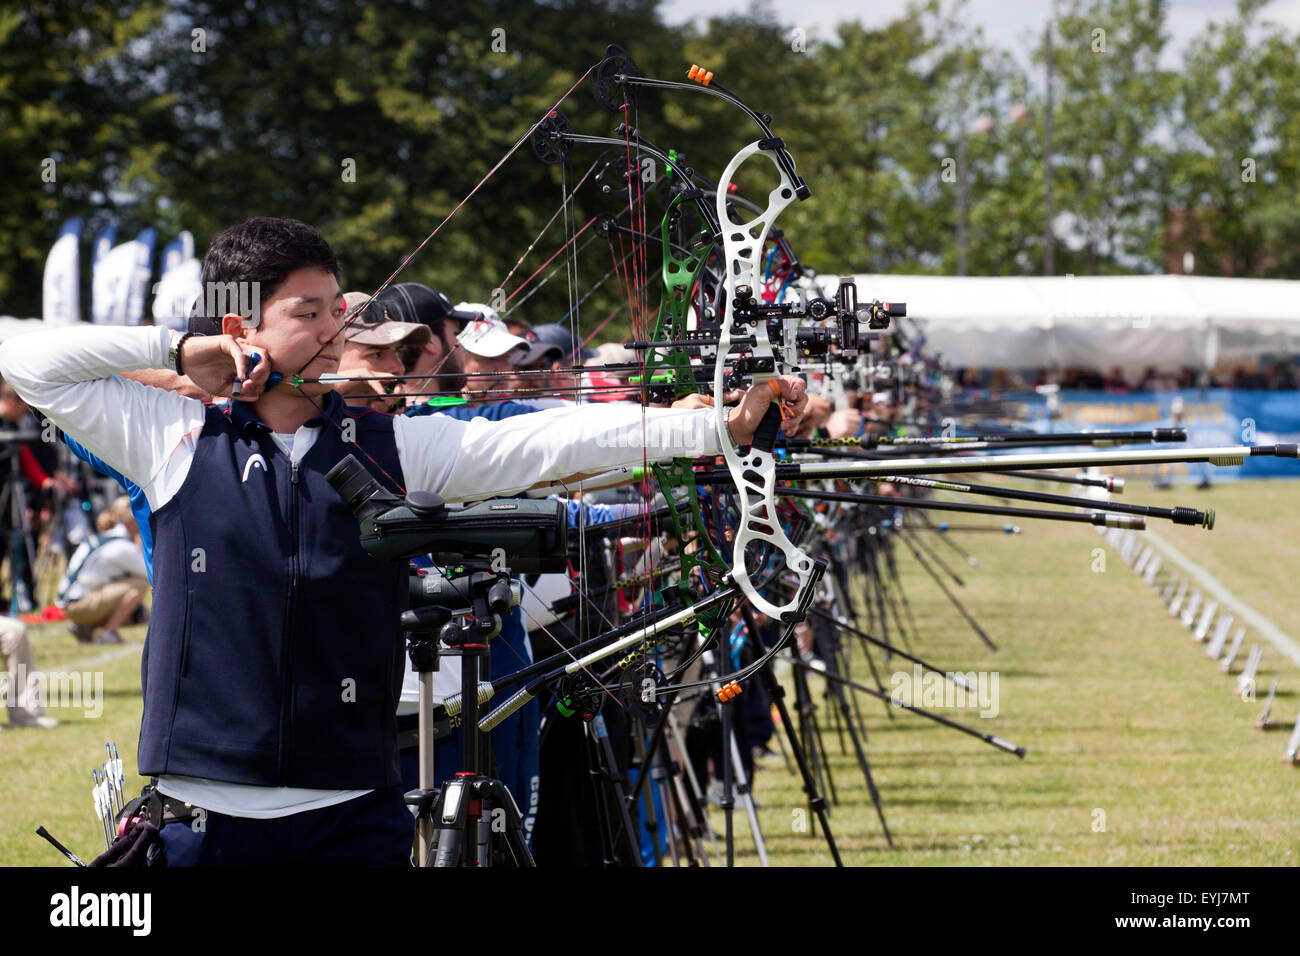 Copenhagen, Denmark, July 30th, 2015: Archers competing in compund bow are ready to shoot at Thursday's competition at the World Archery Championships in Copenhagen. Here pictured archers with compound bow. Credit:  OJPHOTOS/Alamy Live News Stock Photo